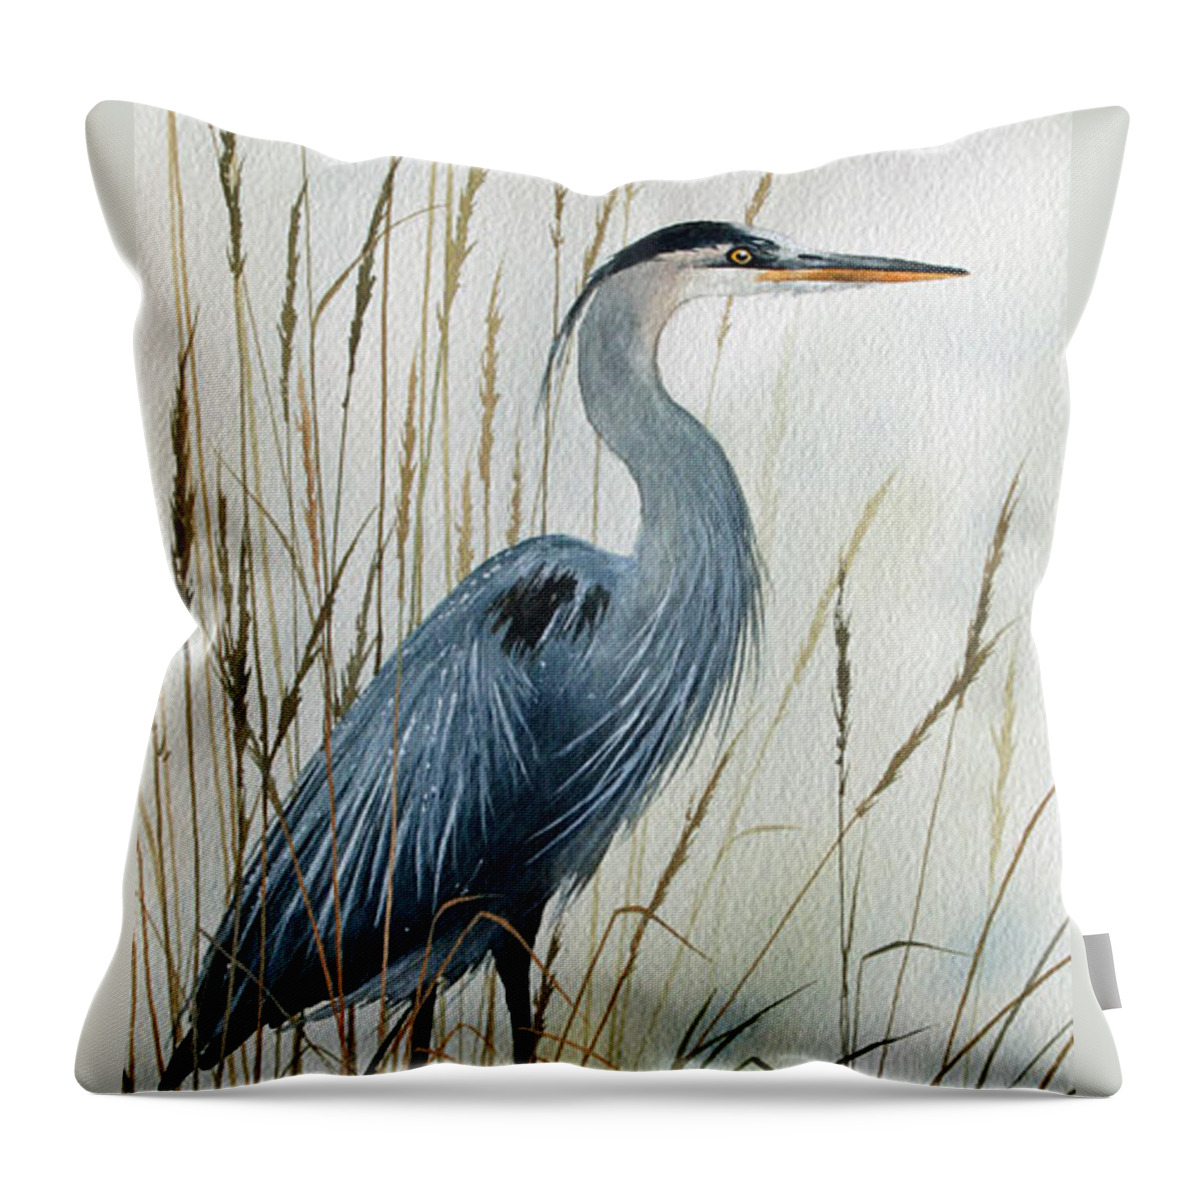 Nature Throw Pillow featuring the painting Natures Gentle Stillness by James Williamson